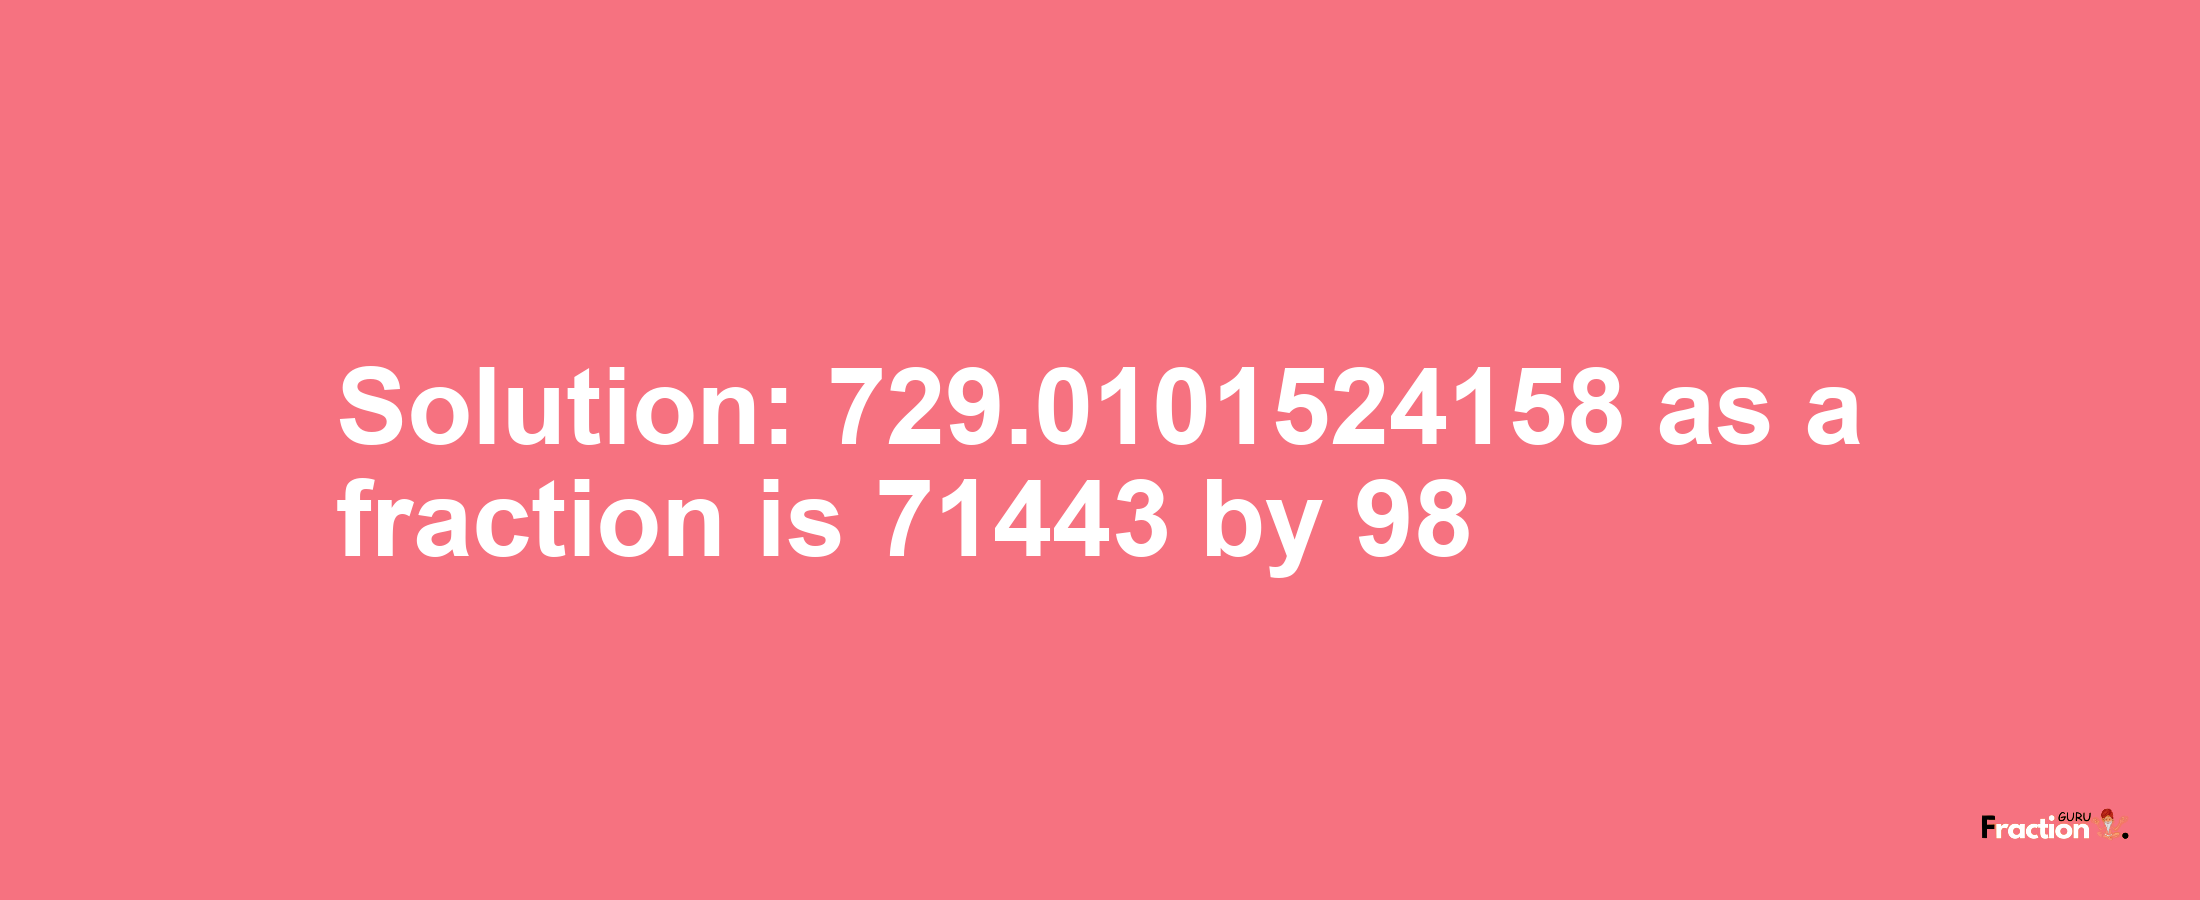 Solution:729.0101524158 as a fraction is 71443/98